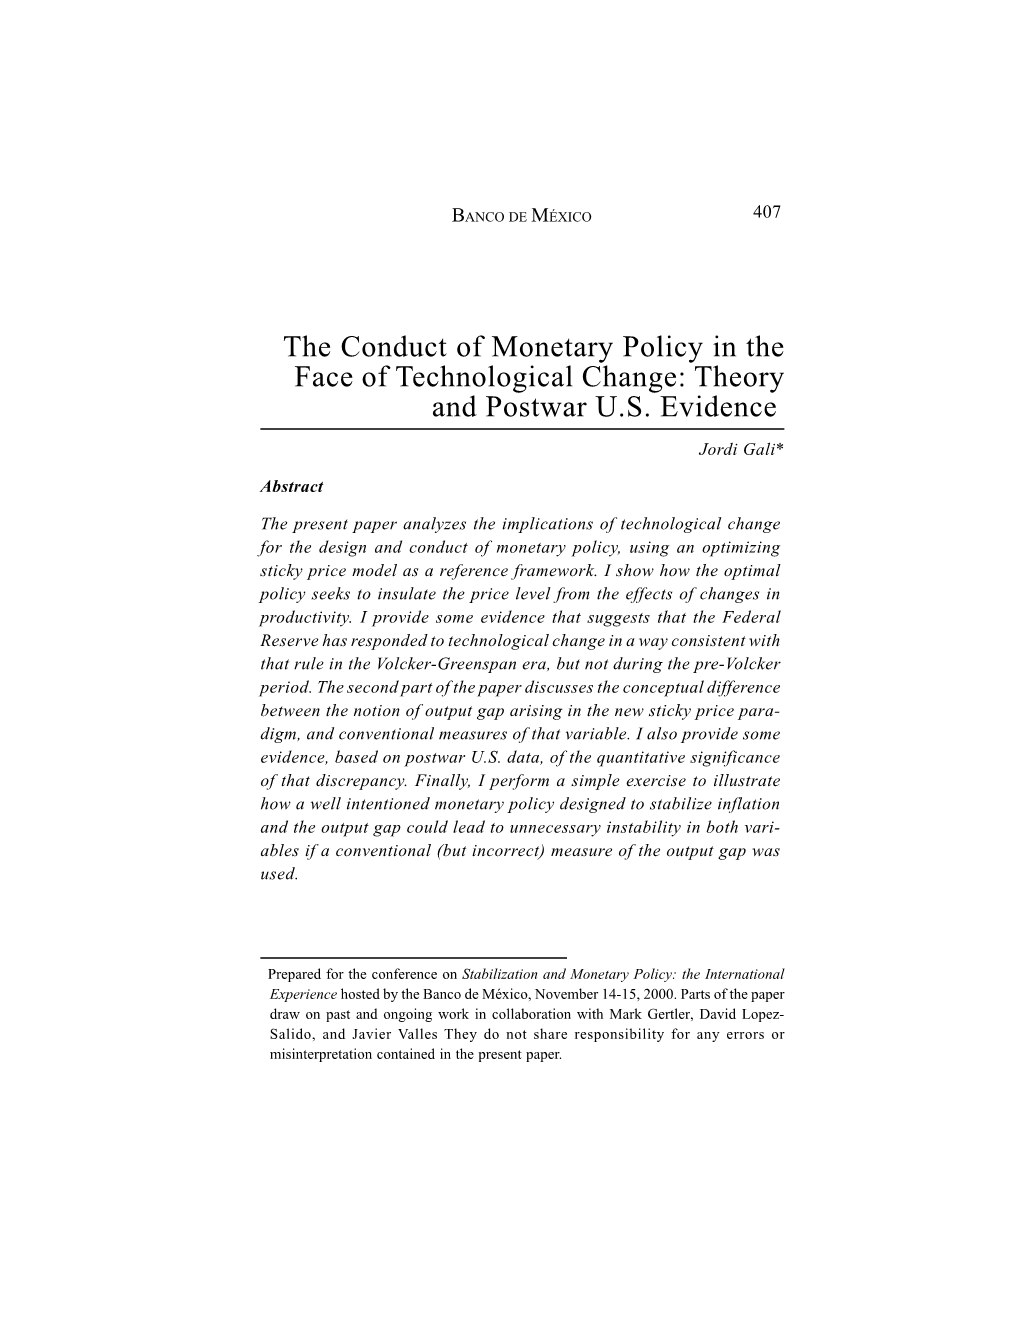 The Conduct of Monetary Policy in the Face of Technological Change: Theory and Postwar U.S